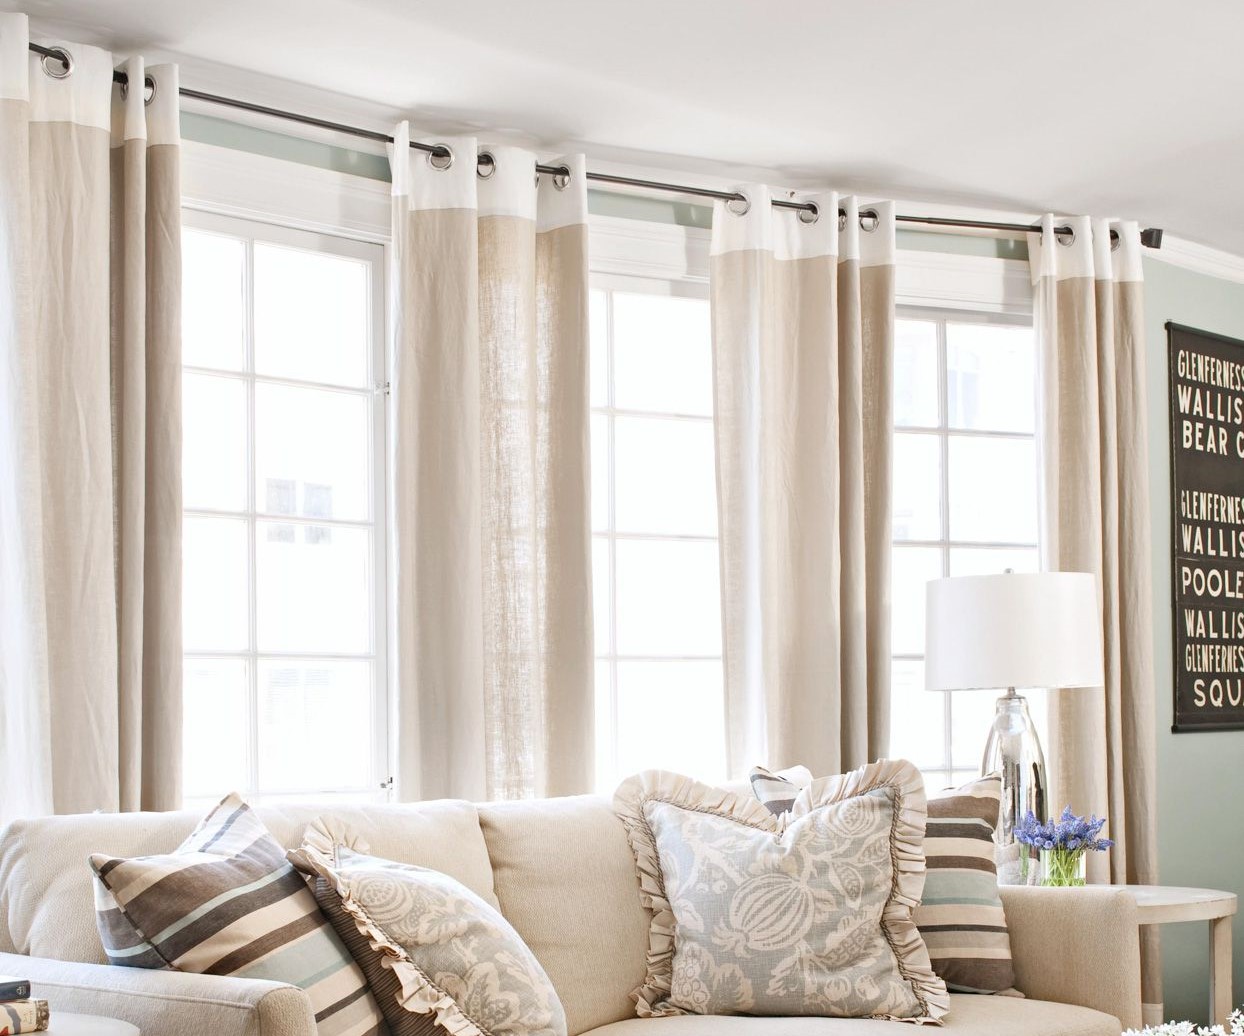 How To Do Curtains For 3 Windows